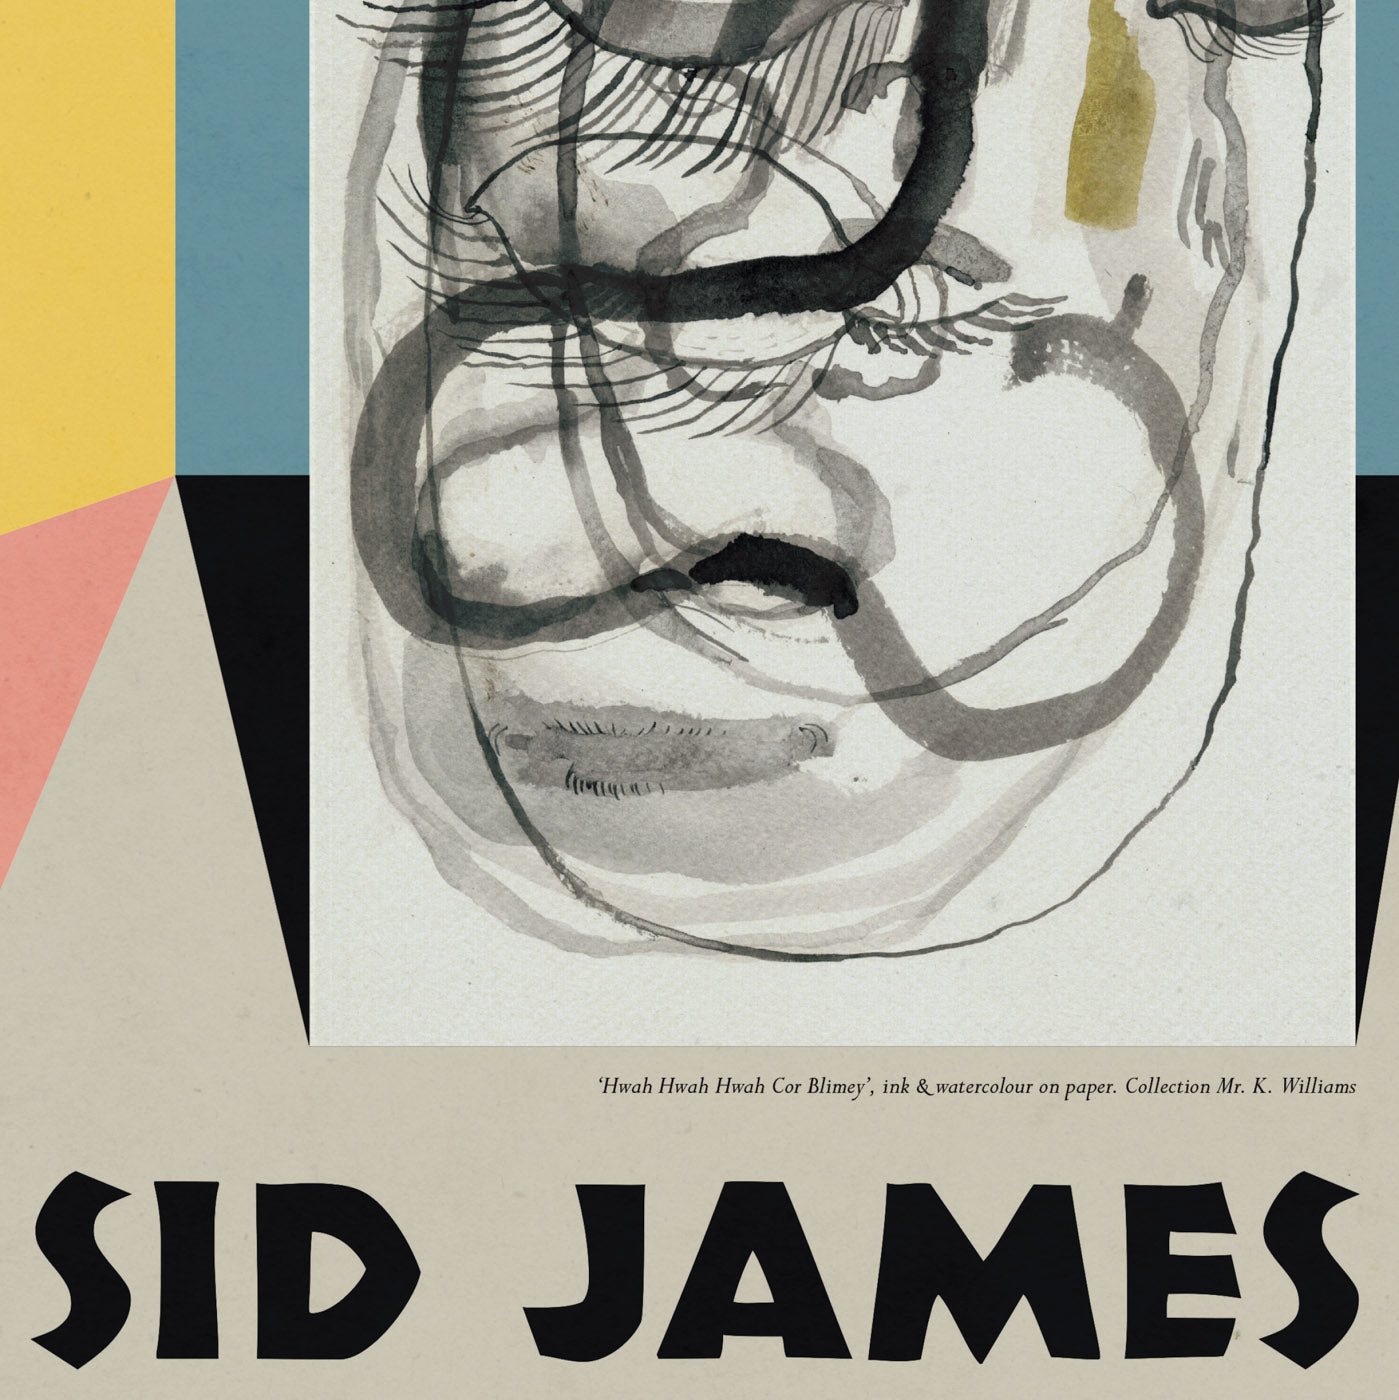 Sid James Carry On Film Art Exhibition Poster Print